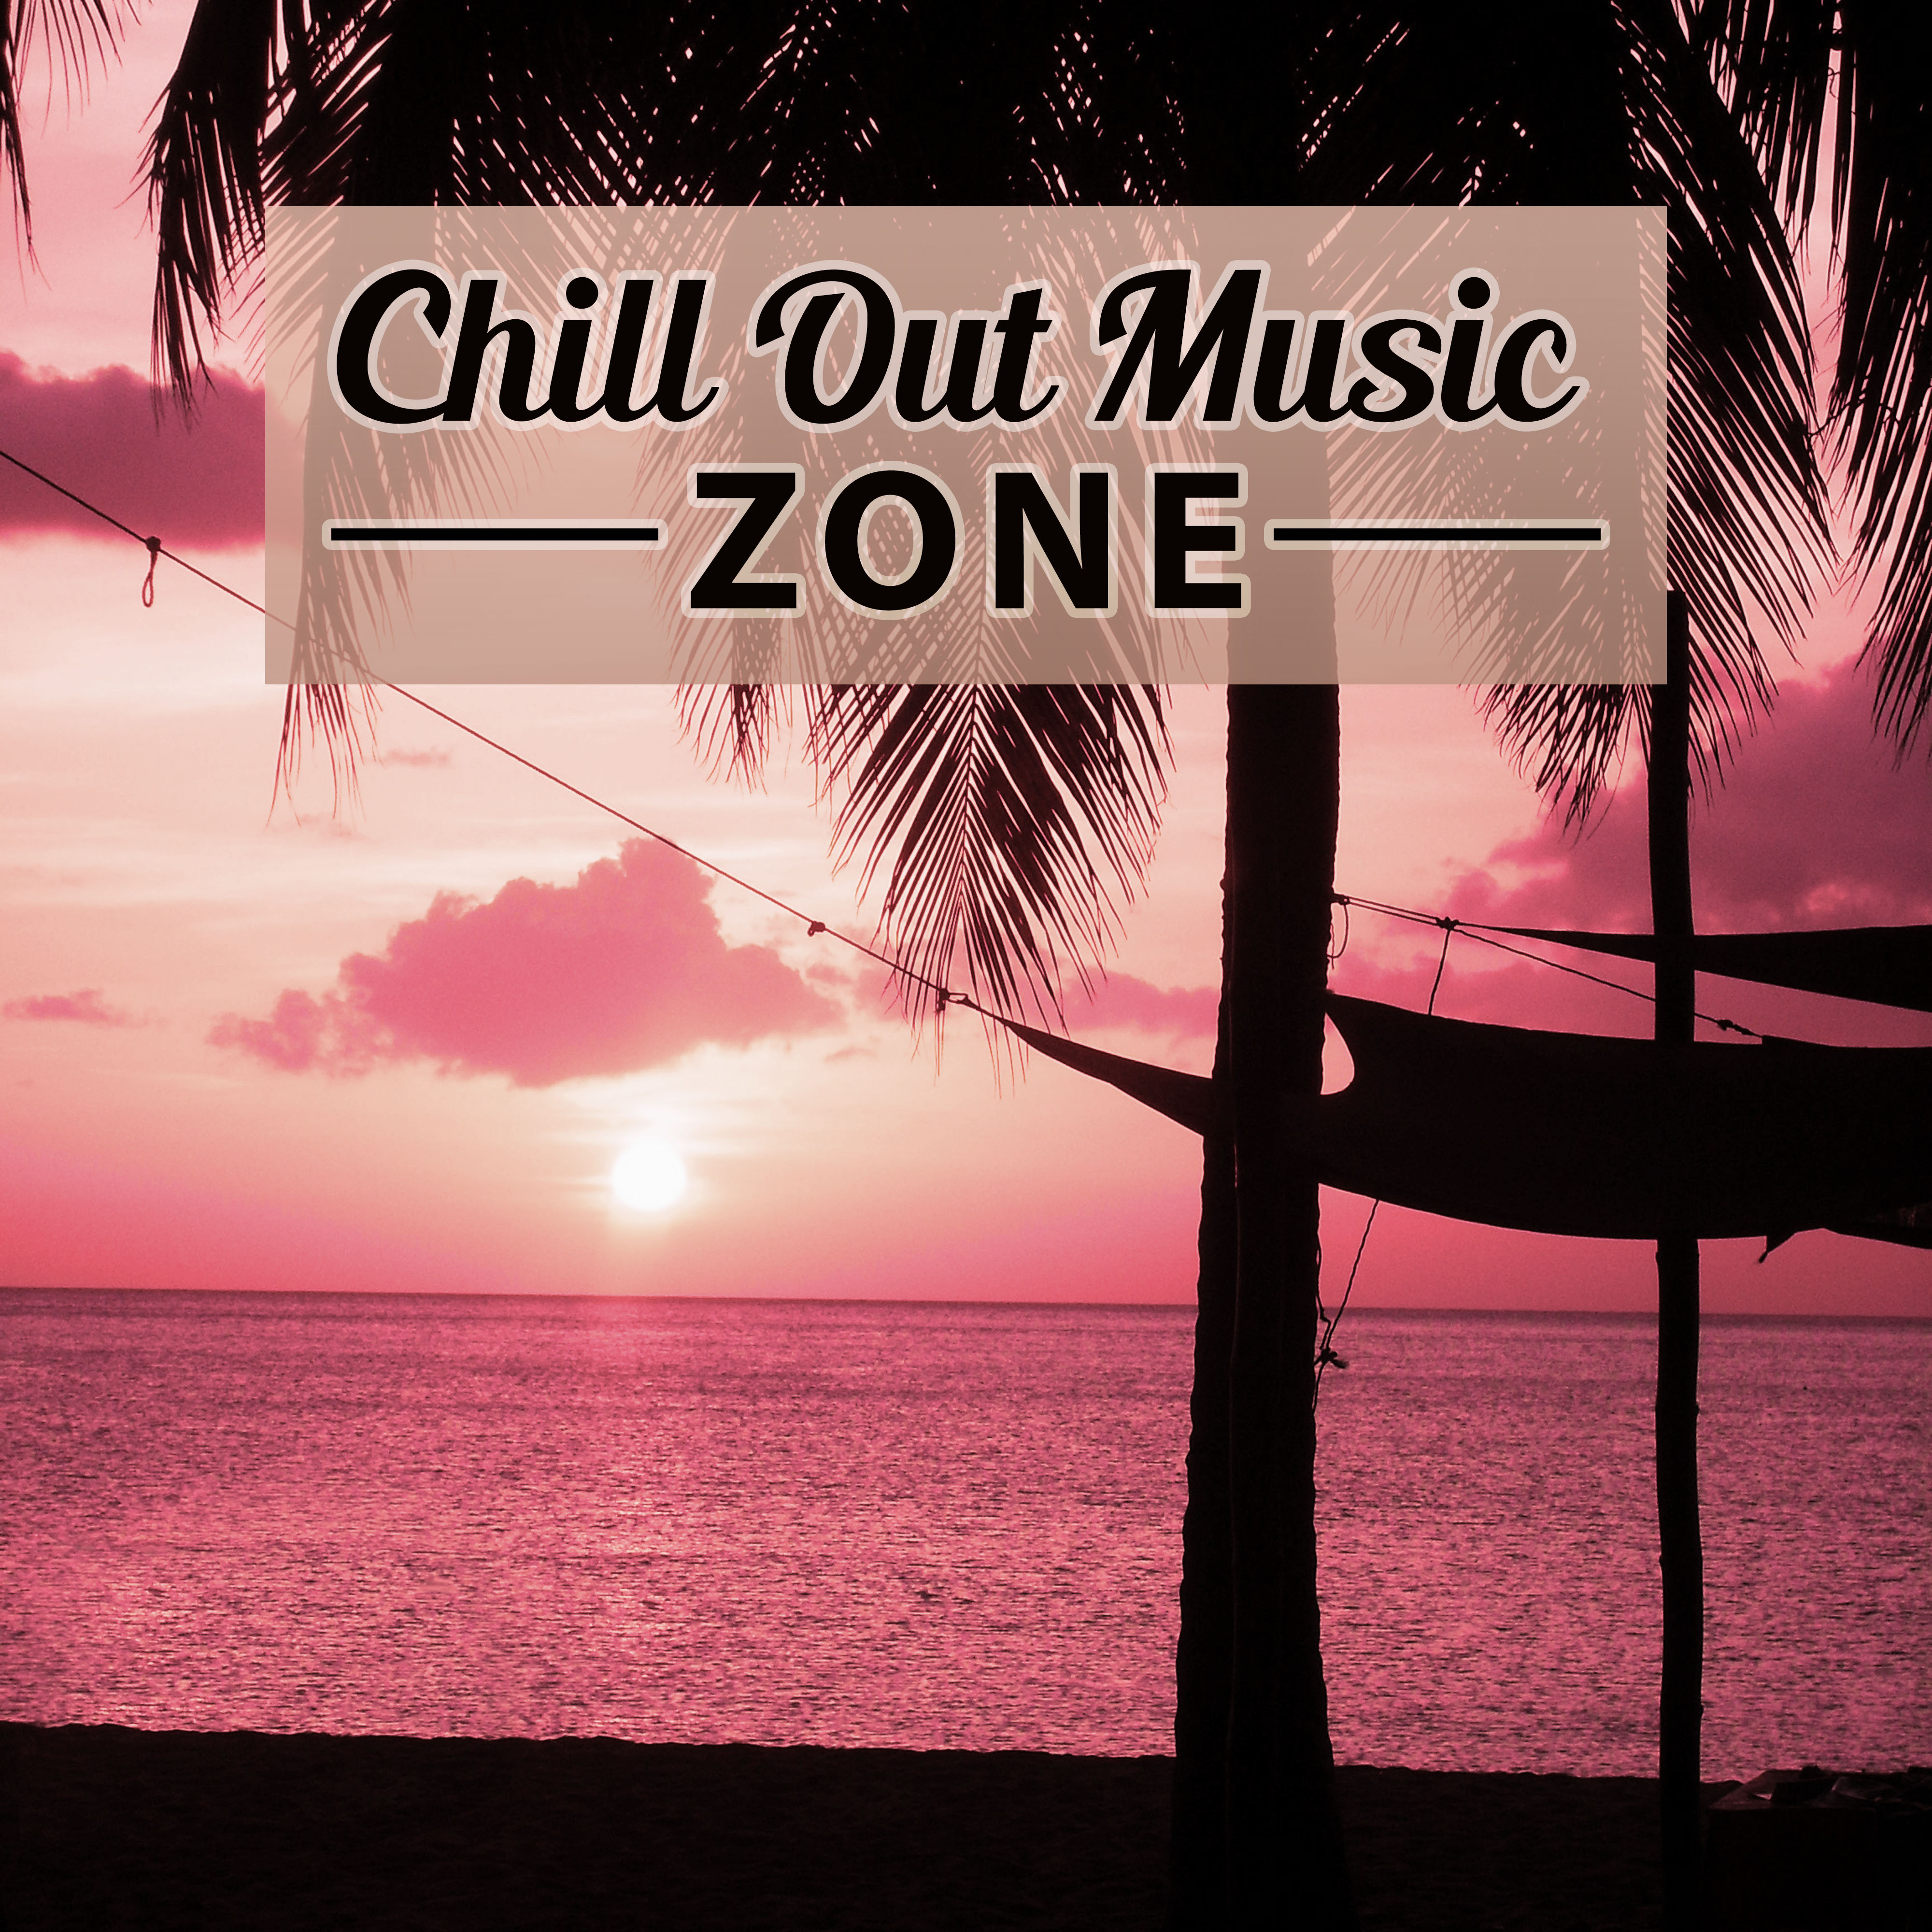 Chill Out Music Zone - Chill Lounge, Holiday in Ibiza 2016, Ambient Lounge Chill